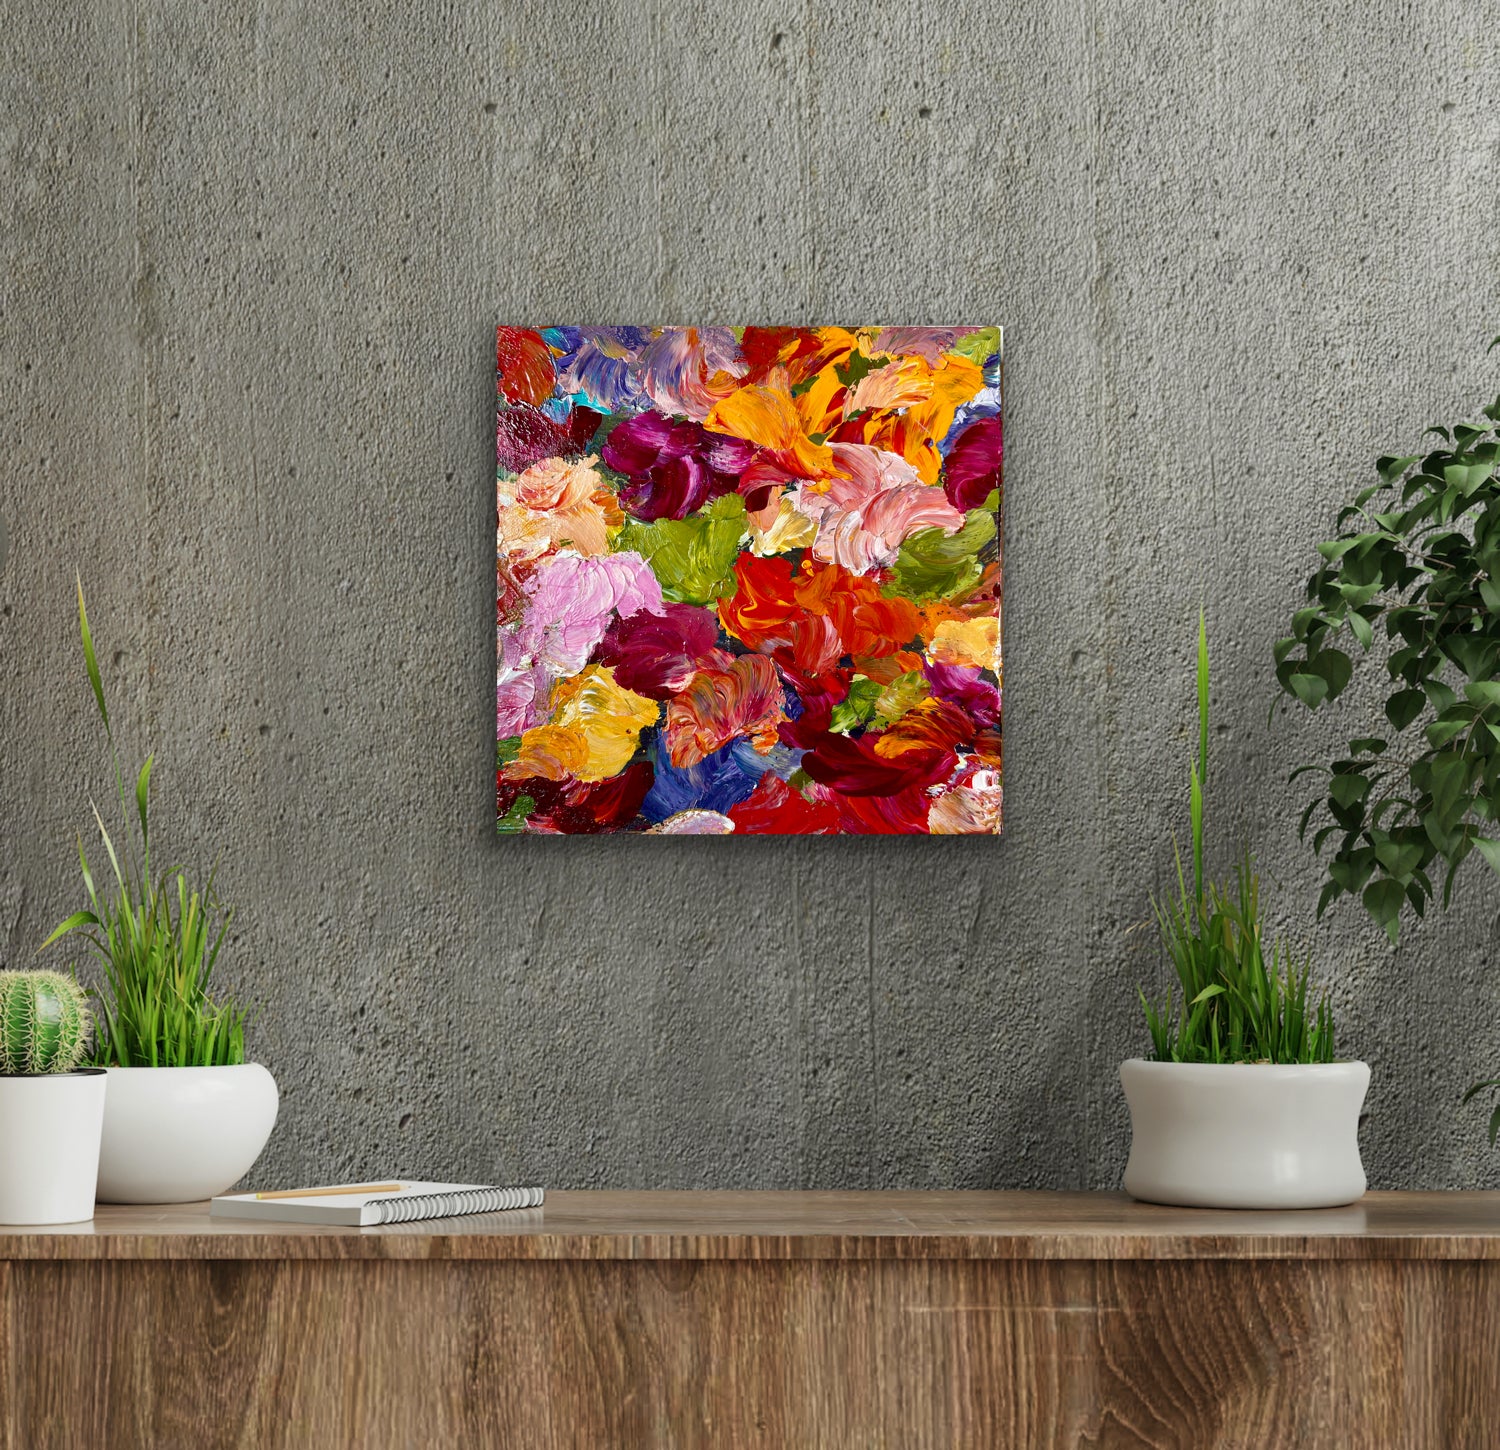 Floral Gardens. Original acrylic painting by Ottawa-based artist Mireille Laroche, 14 by 14 inch on 1 .5 inch deep canvas